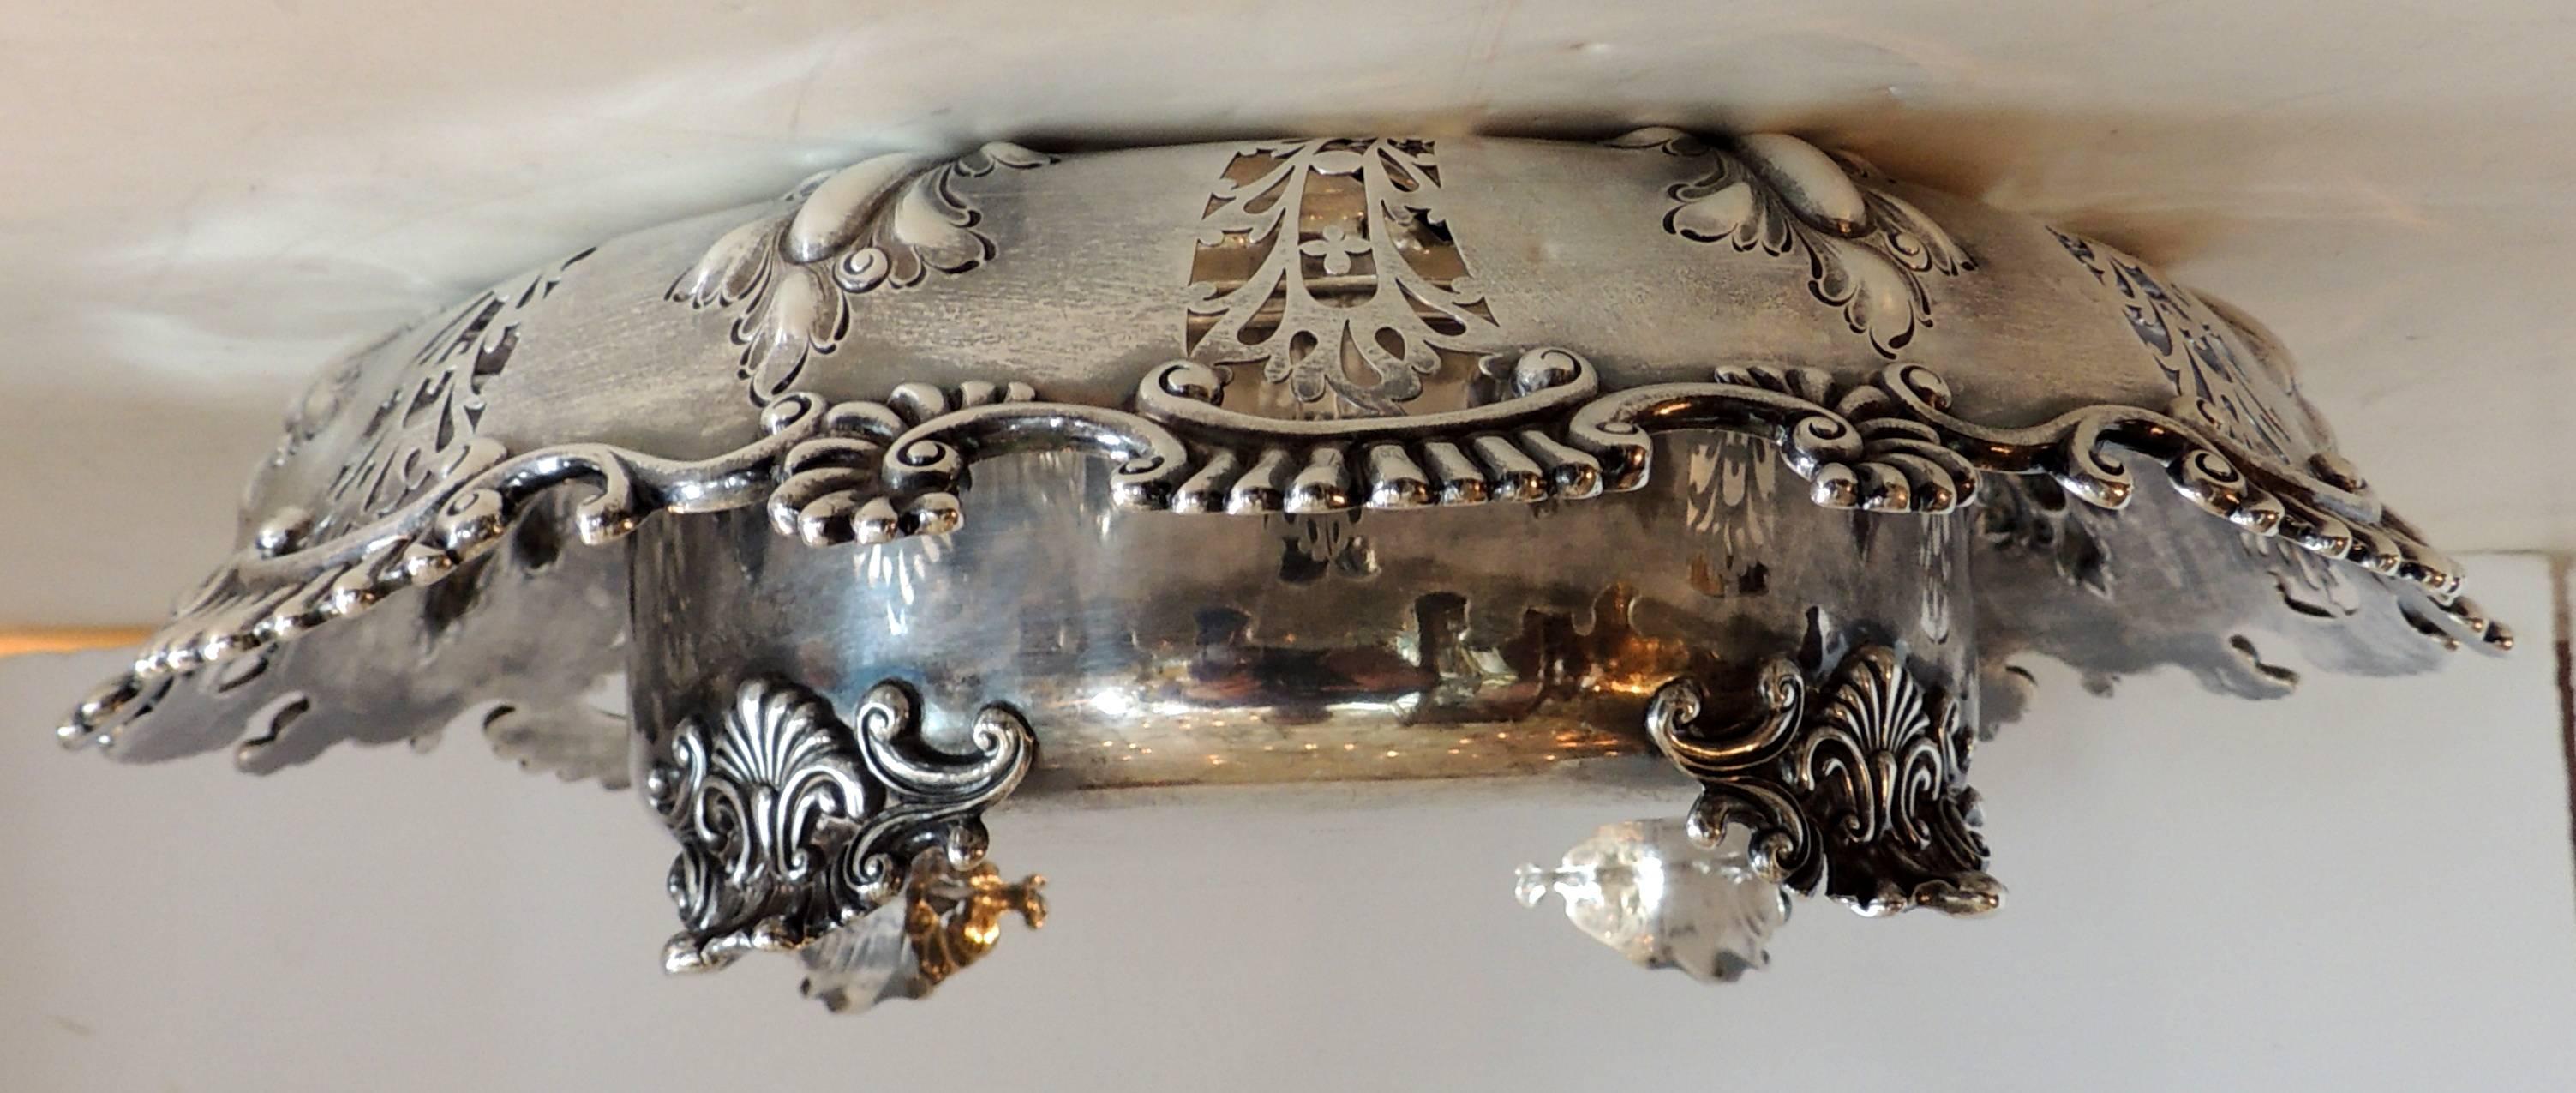 American Wonderful Theodore B. Star Sterling Silver Pierced Footed Centrepiece Bowl For Sale